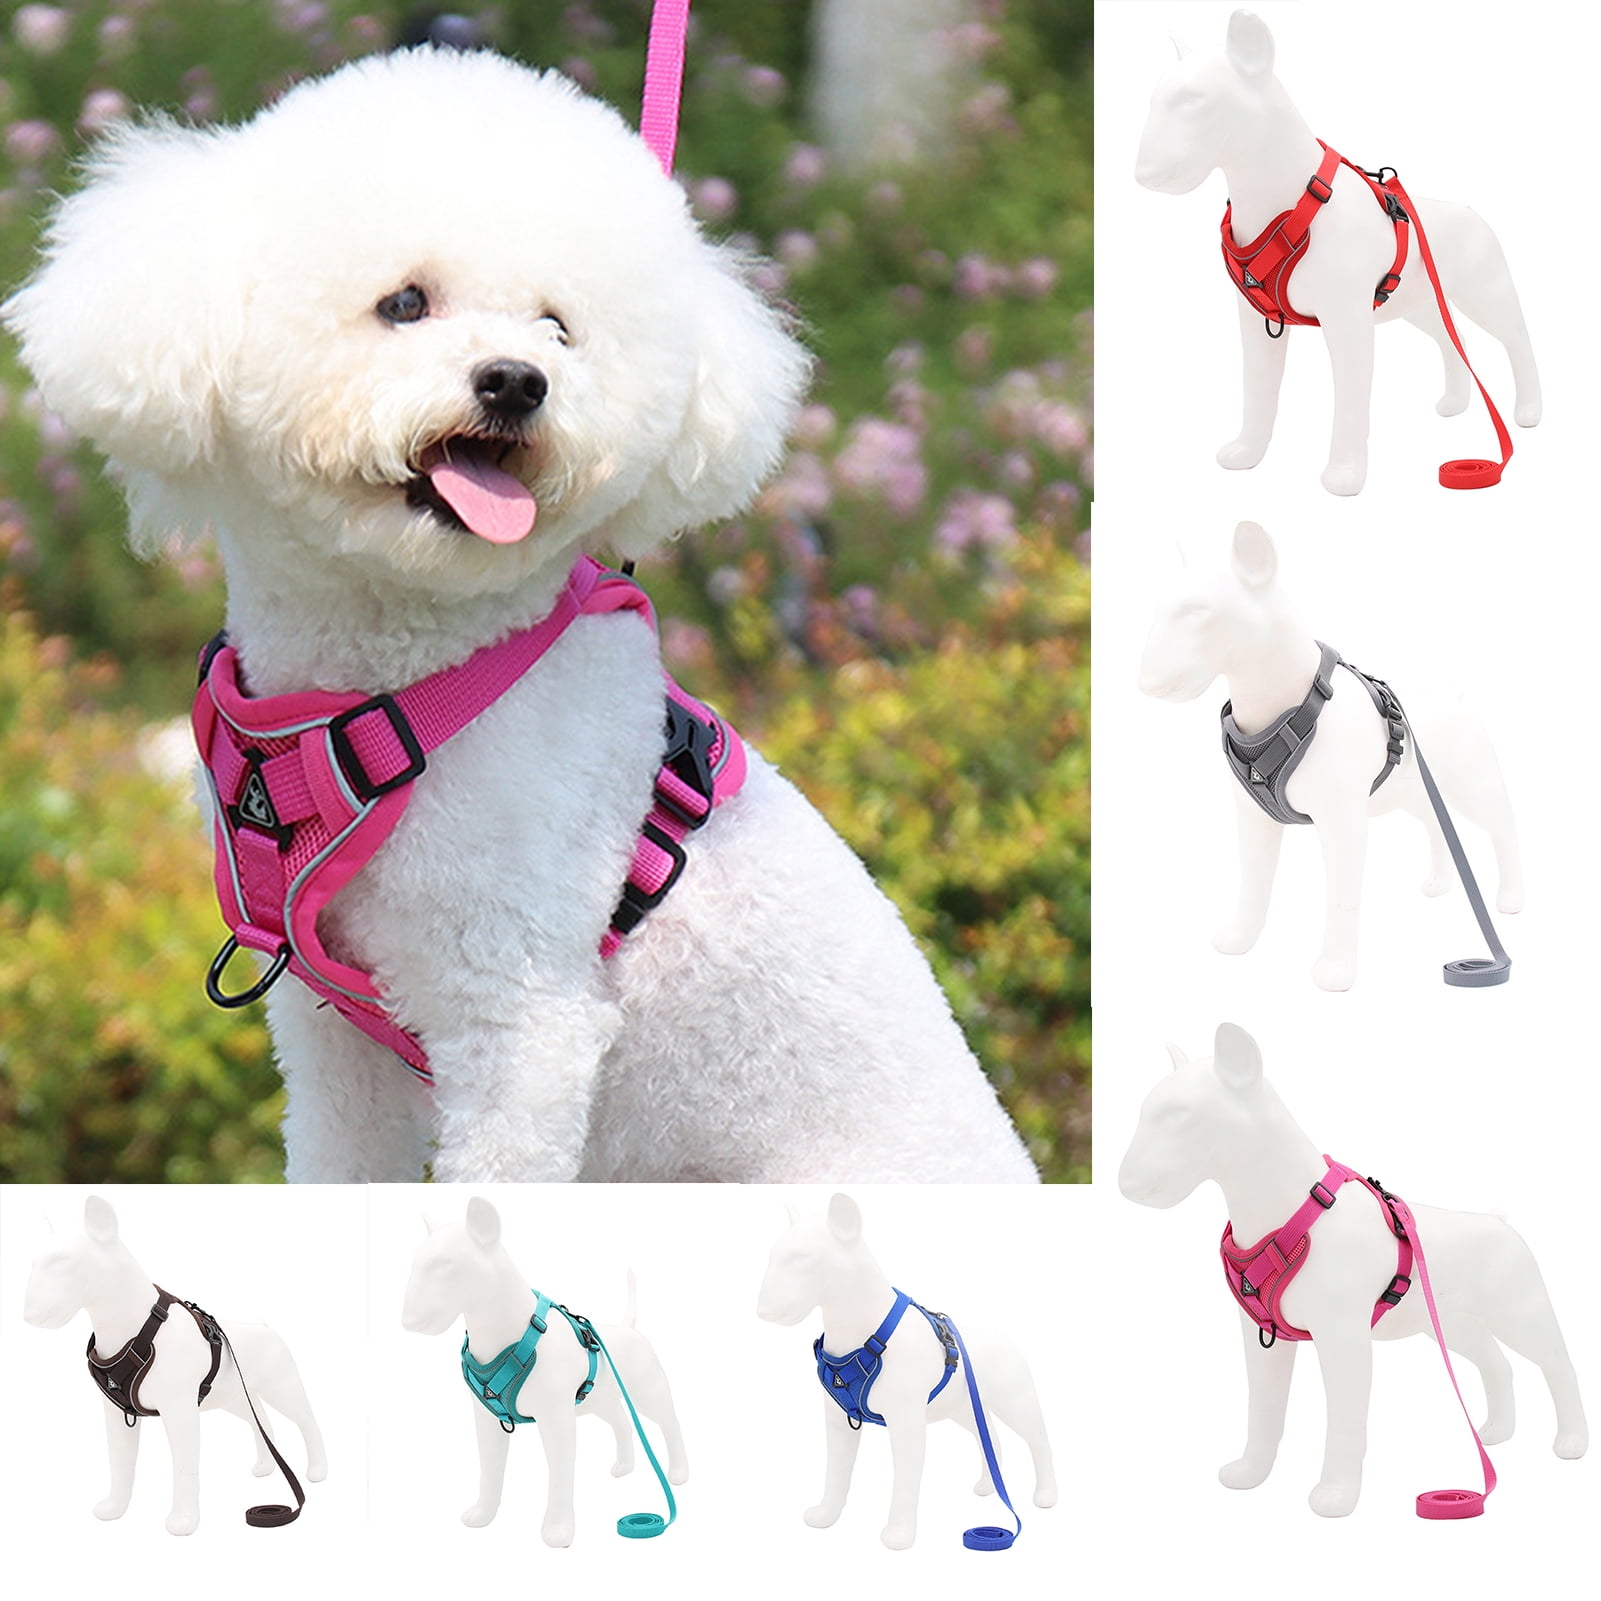 Cotton Soft Dog Harness Air Mesh Puppy Pet Dog Car Harness for Small Medium Dogs 